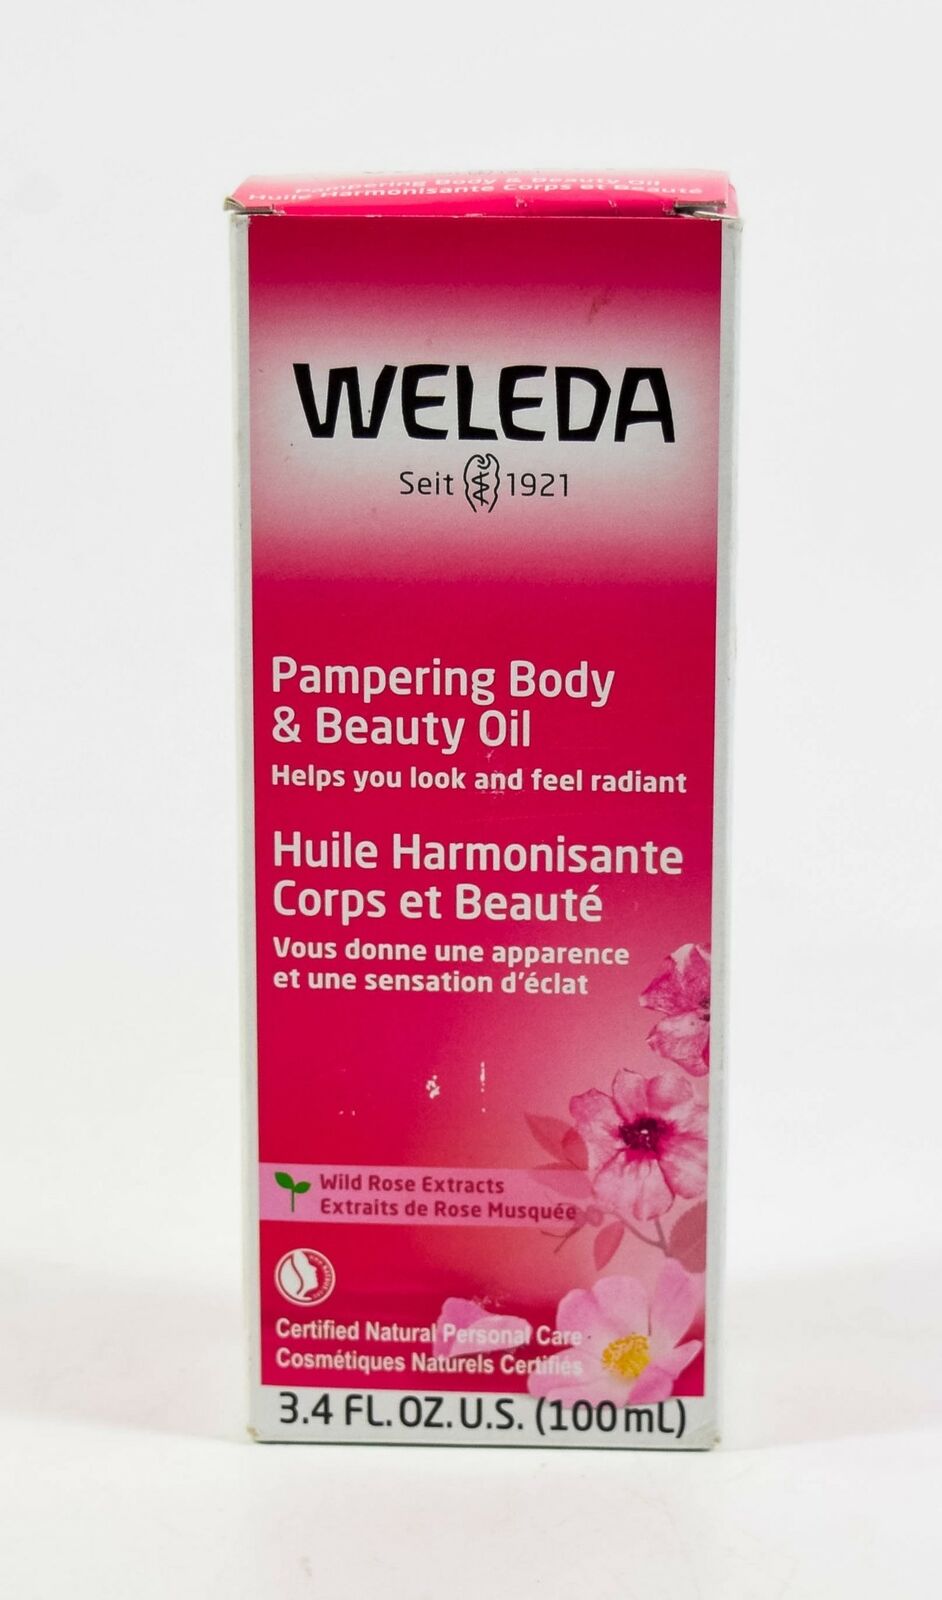 1 Weleda PAMPERING BODY & BEAUTY OIL 3.4oz natural Wild Rose Extract NIB 09/2023